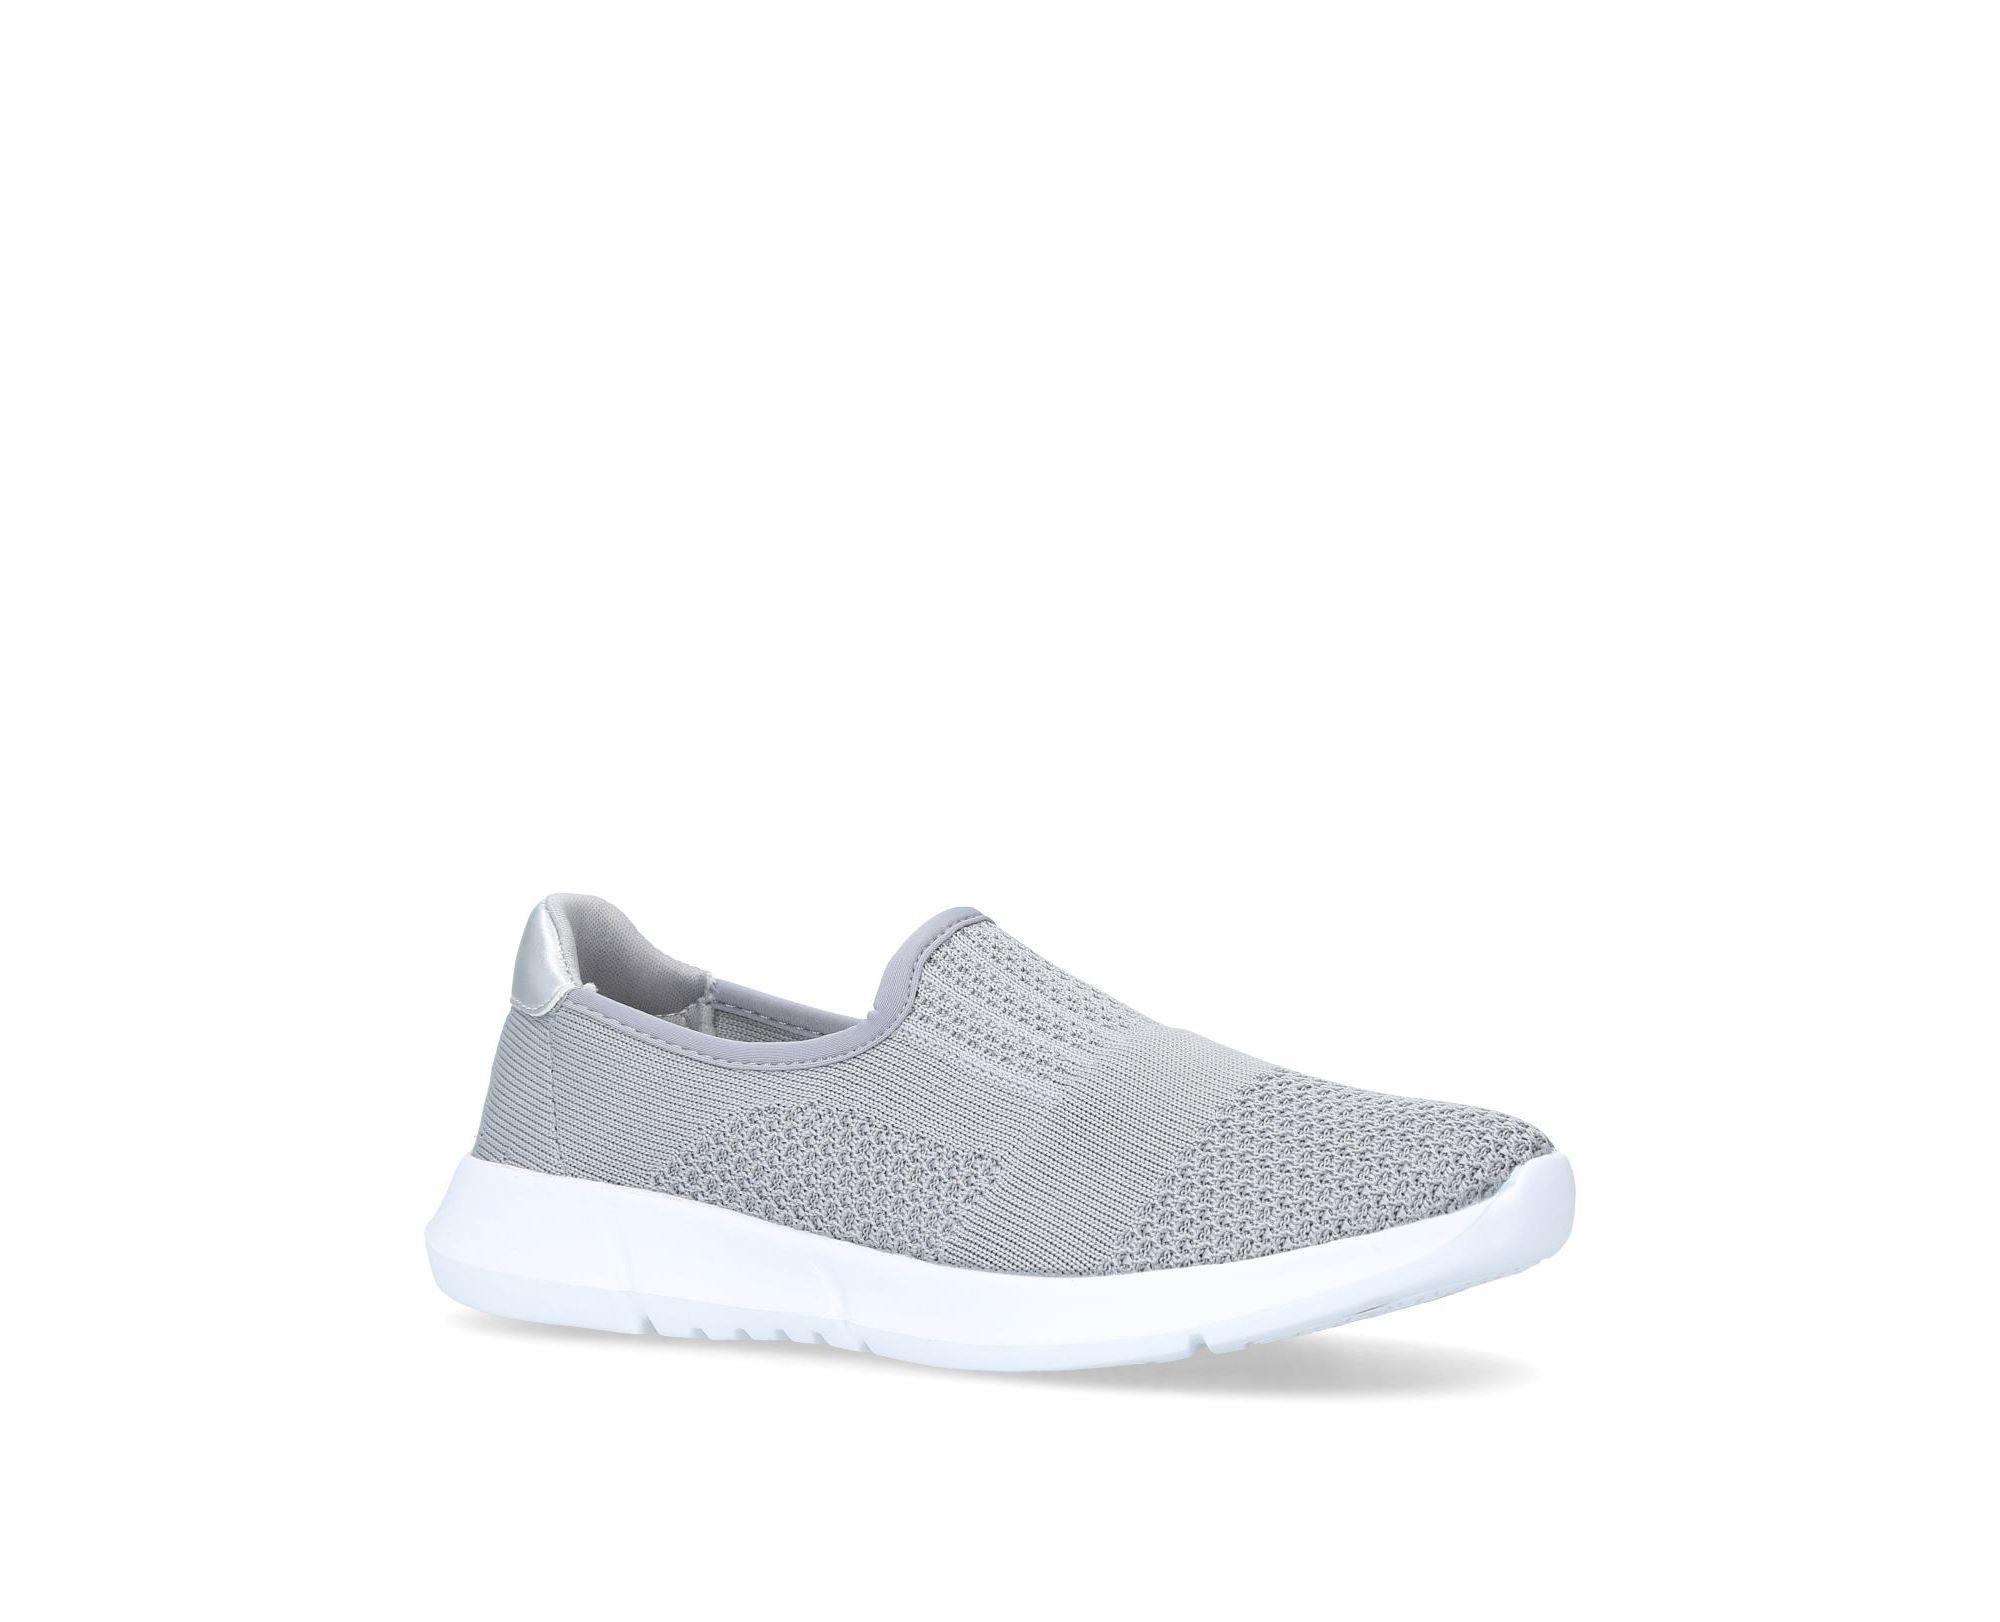 Carvela Kurt Geiger Grey 'carly' Slip On Trainers in Gray - Save 29% - Lyst